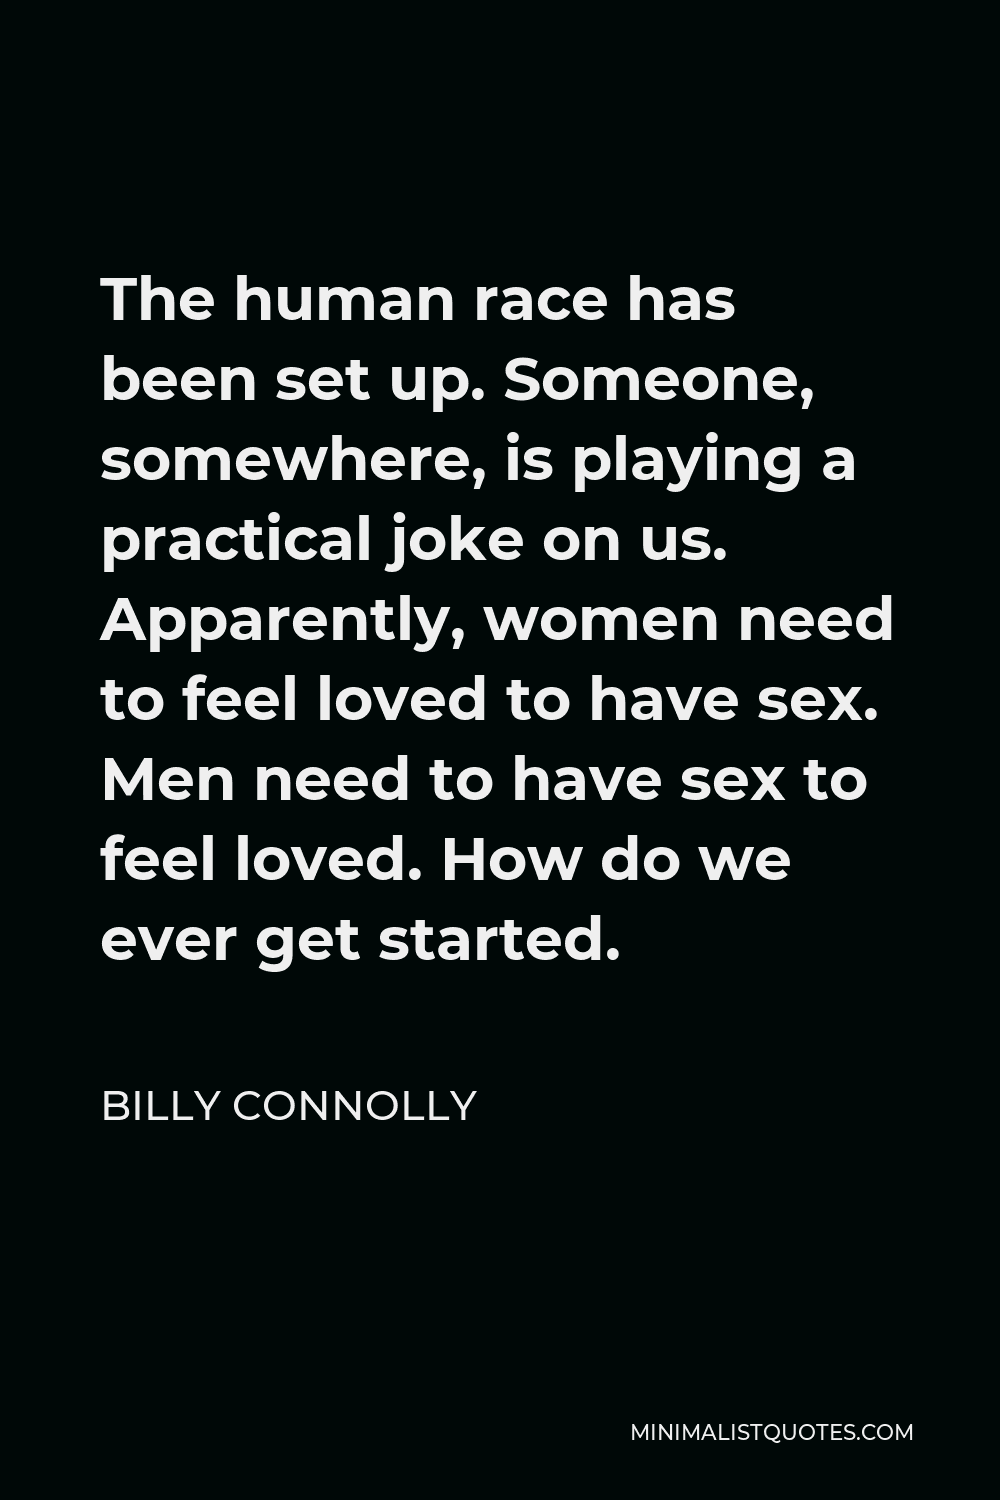 Billy Connolly Quote - The human race has been set up. Someone, somewhere, is playing a practical joke on us. Apparently, women need to feel loved to have sex. Men need to have sex to feel loved. How do we ever get started.